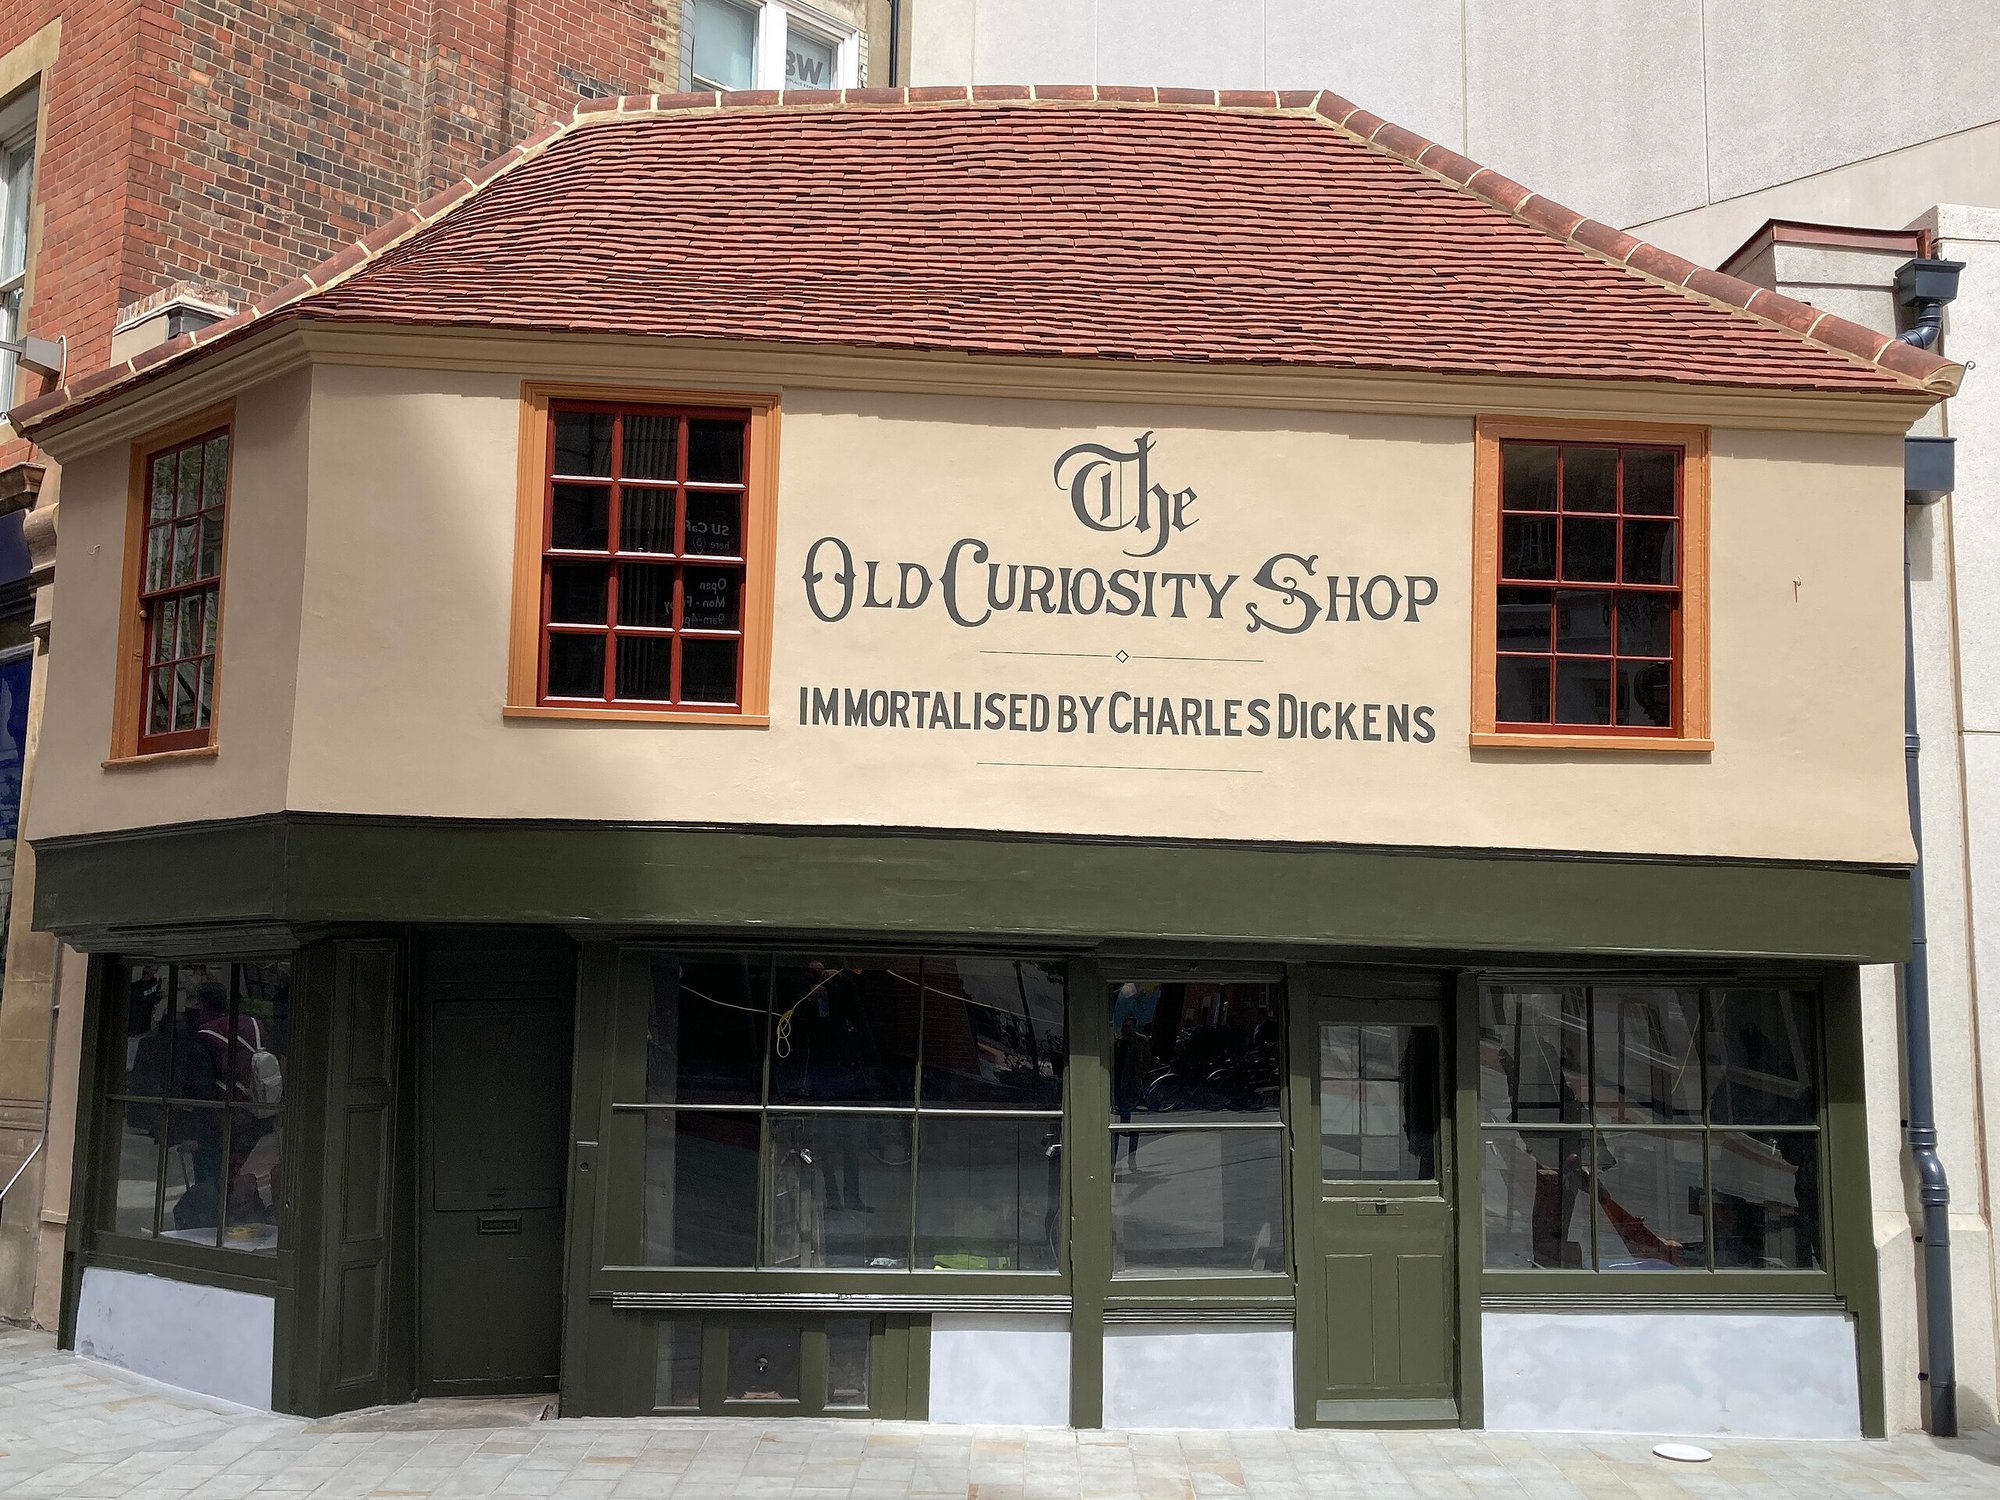 The_Old_Curiosity_Shop_after_paint_job_(cropped)